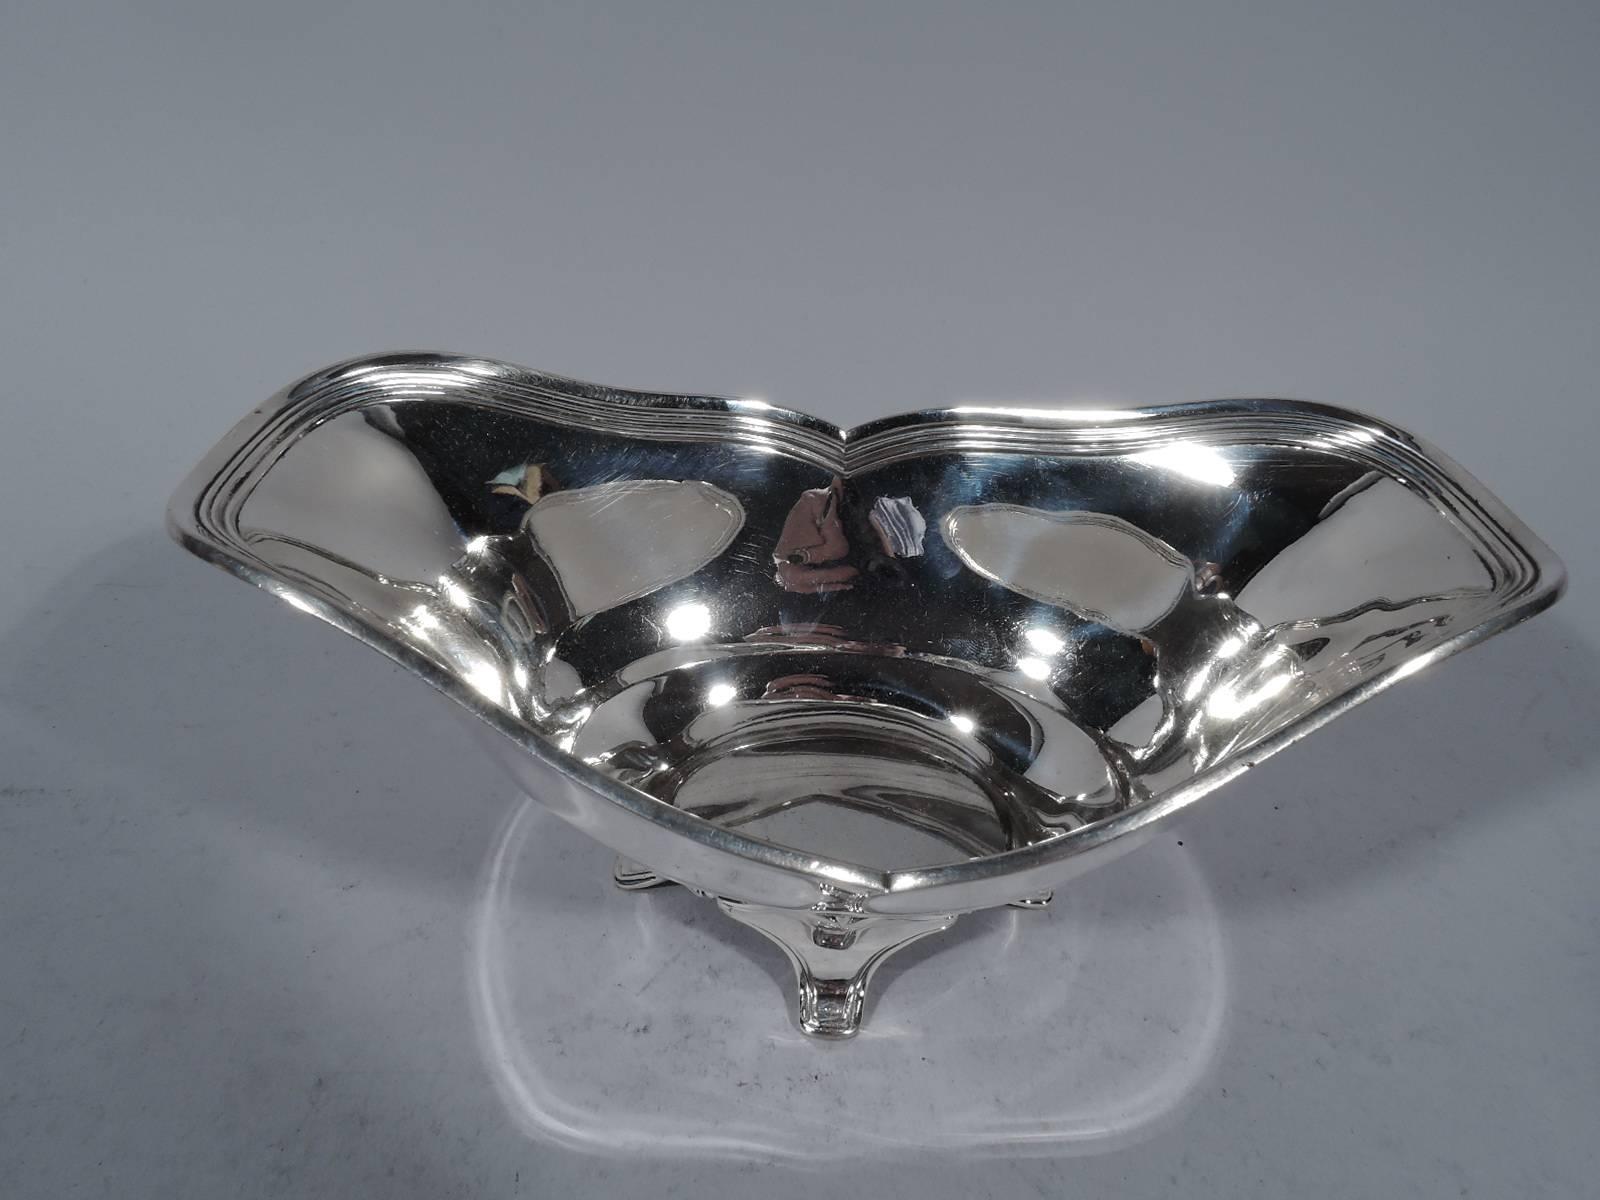 Sterling silver bowl. Made by Tiffany & Co. in New York, circa 1910. Asymmetrical rim with interior reeding. Sides crimped at center. Rests on four supports with scrolled mounts. Hallmark includes pattern no. 15602E1 and director’s letter m